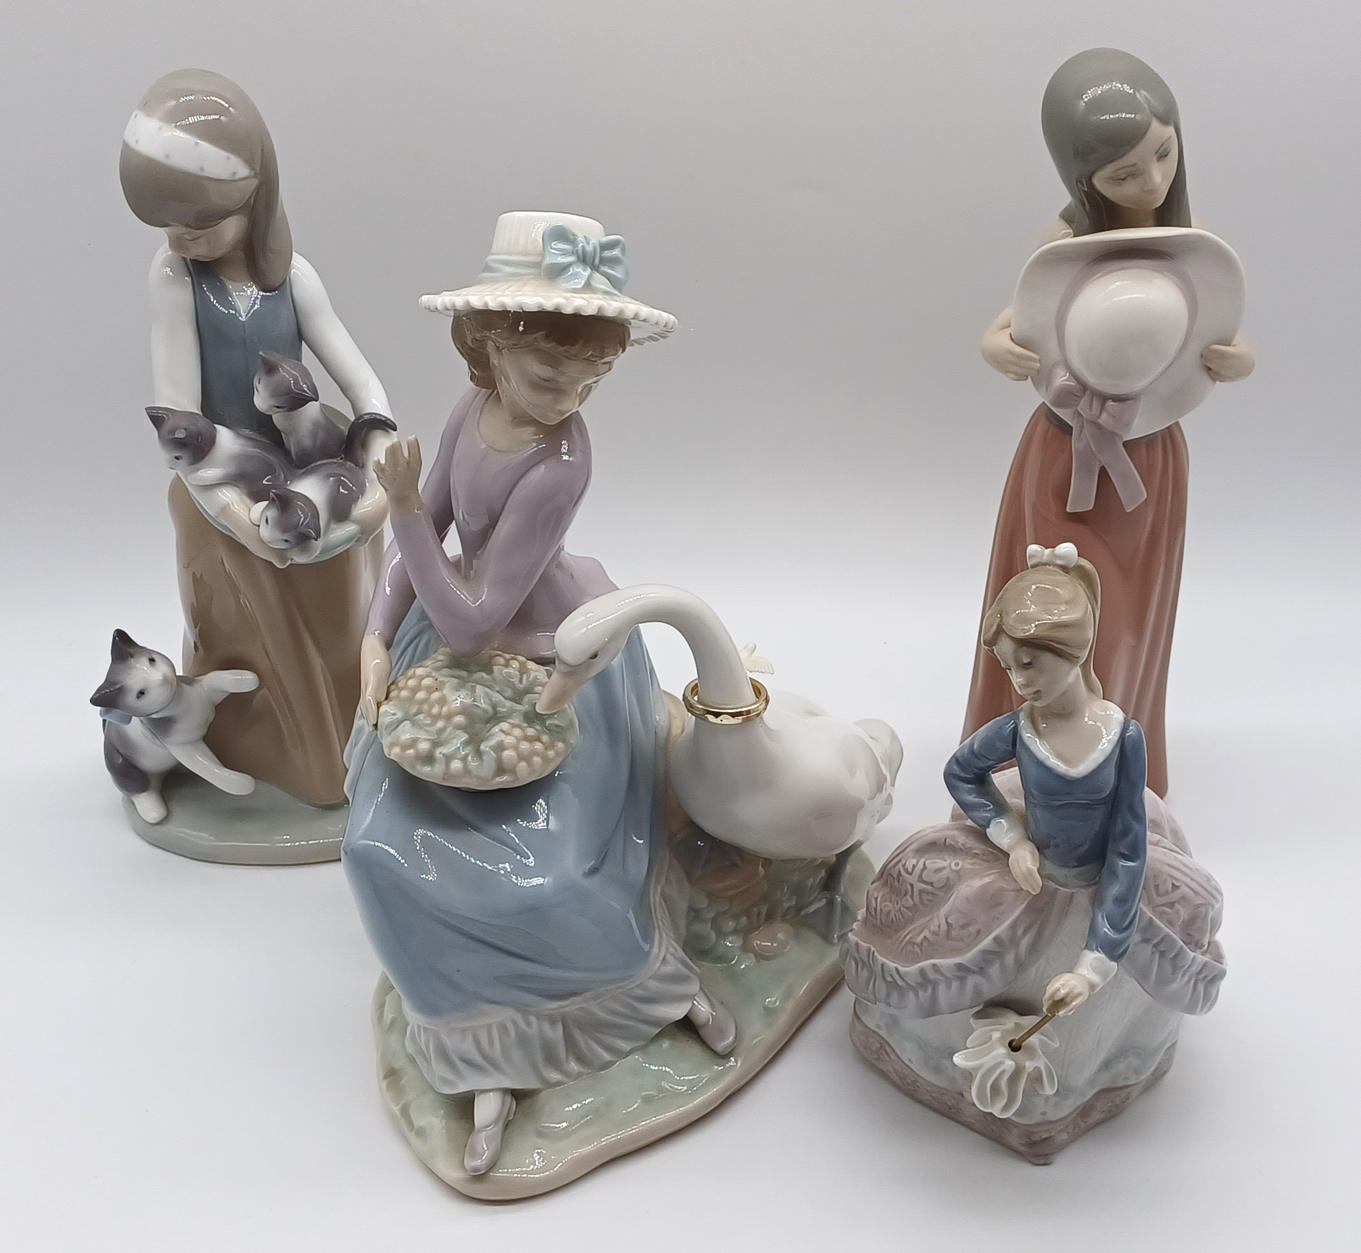 4 LLADRO - GIRL WITH GOOSE, GIRL HOLDING AN UMBRELLA, GIRL HOLDING A HAT, GIRL HOLDING KITTENS